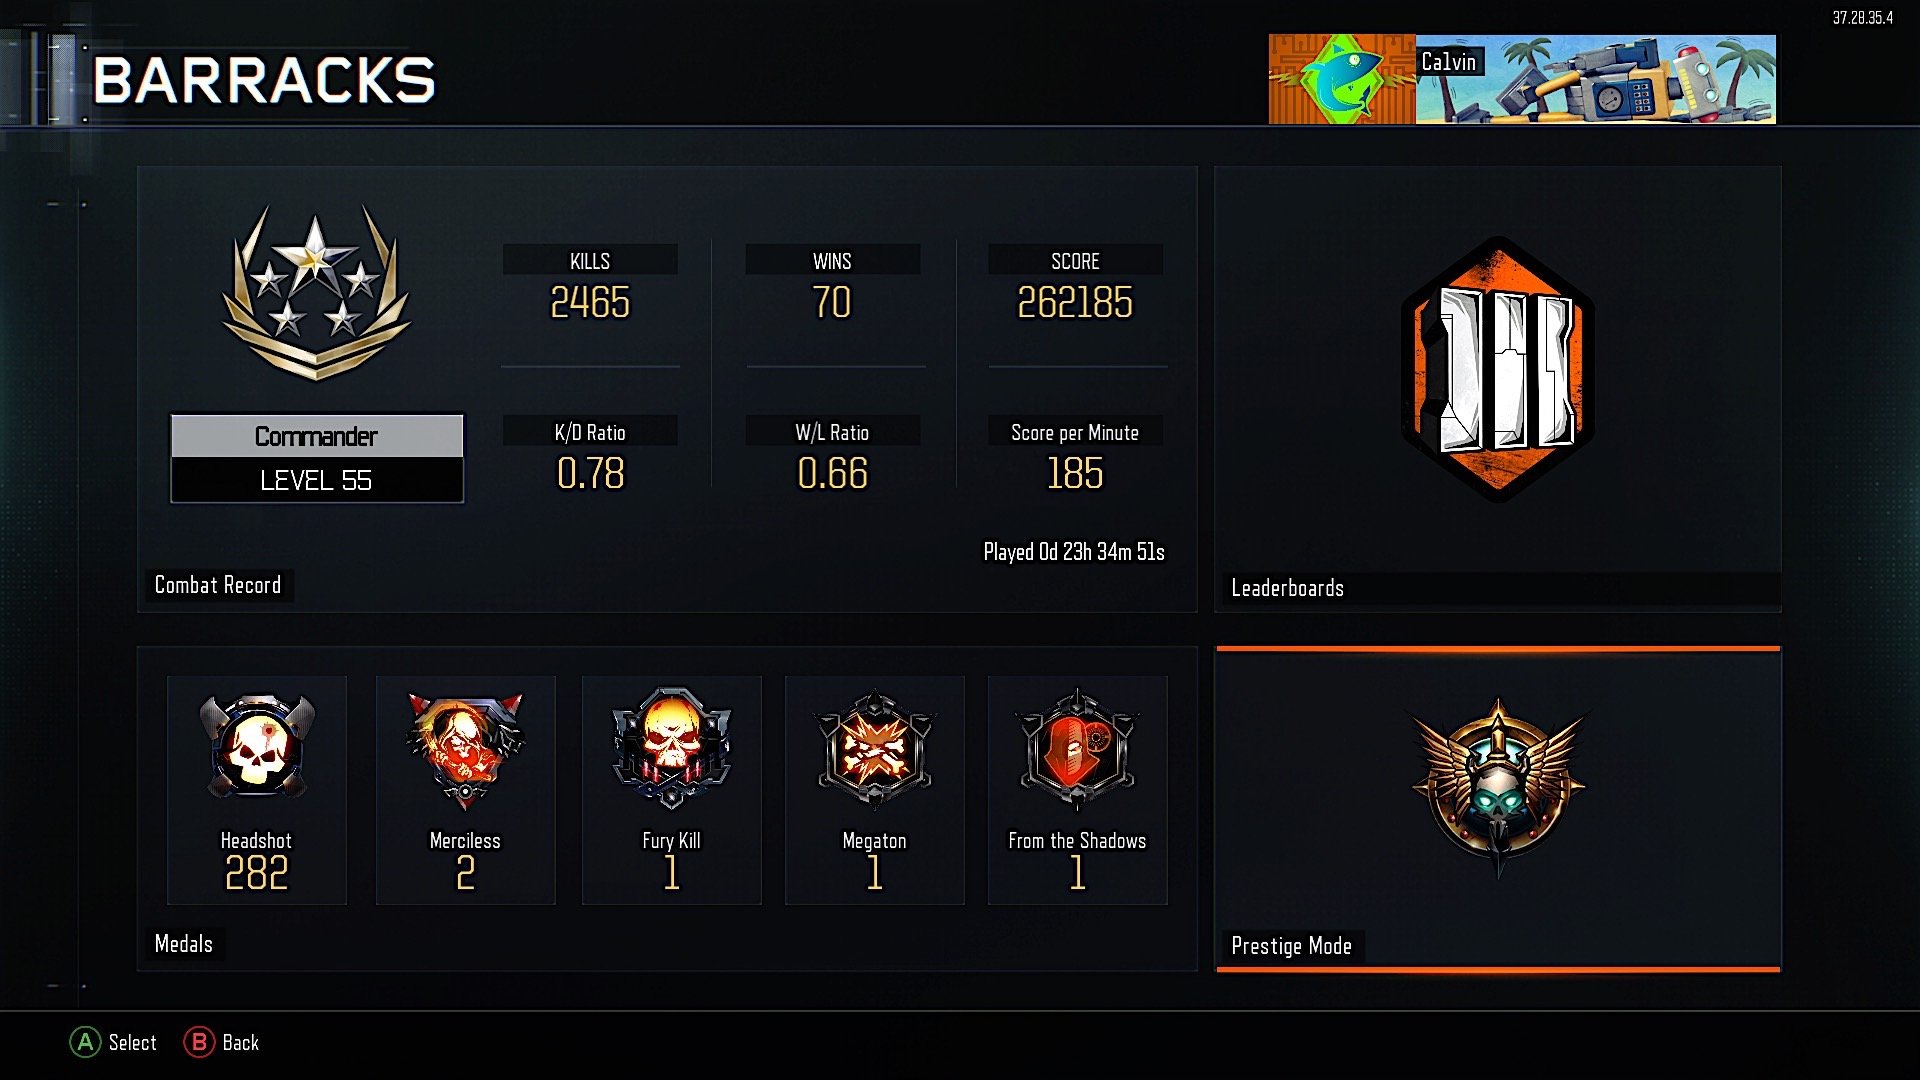 This is what happens when you complete Black Ops 3 Prestige.